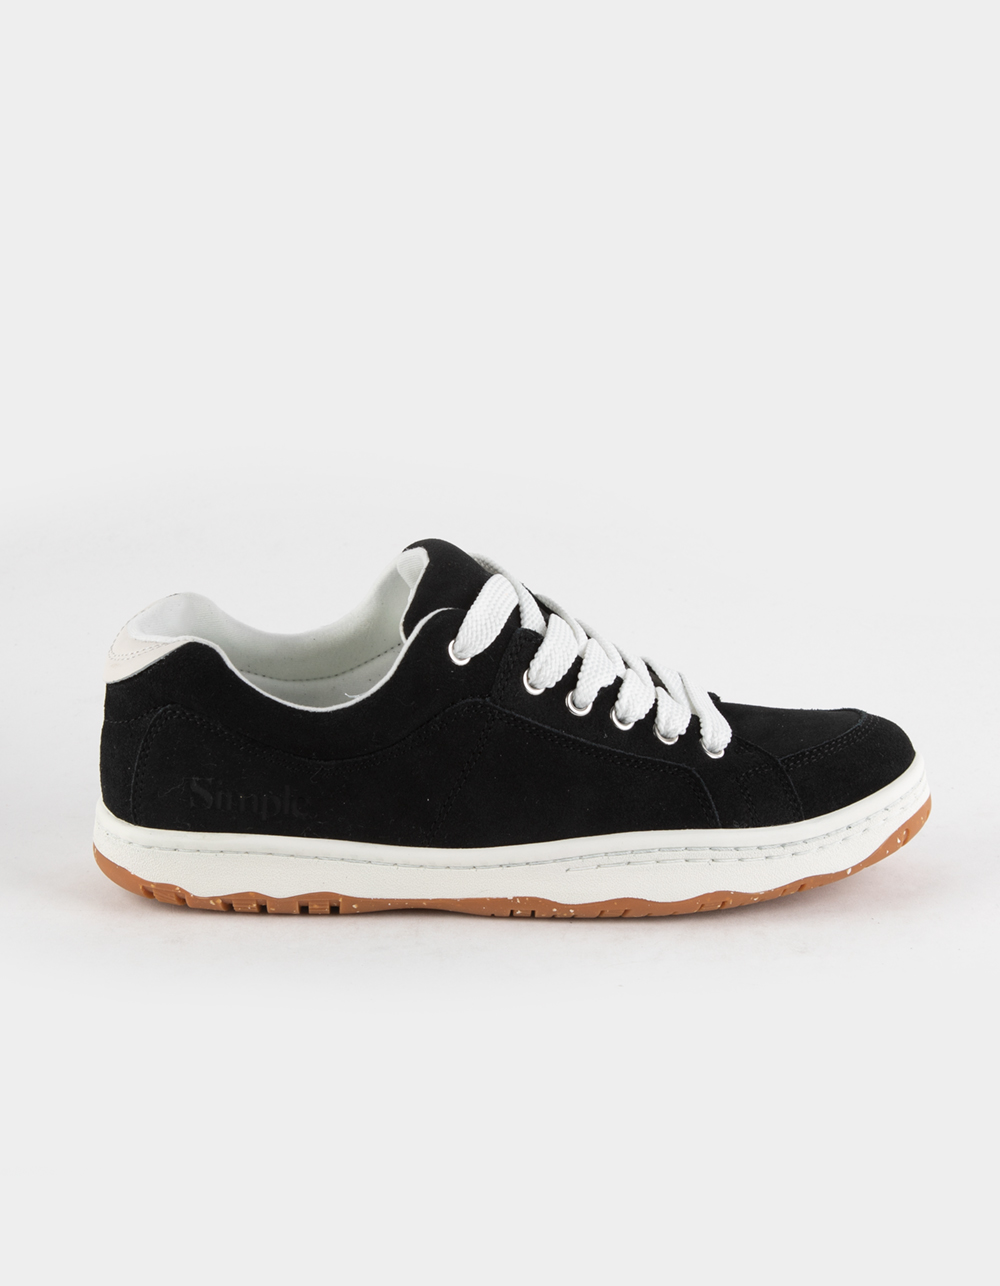 SIMPLE OS Standard Issue Suede Shoes - BLK/WHT | Tillys